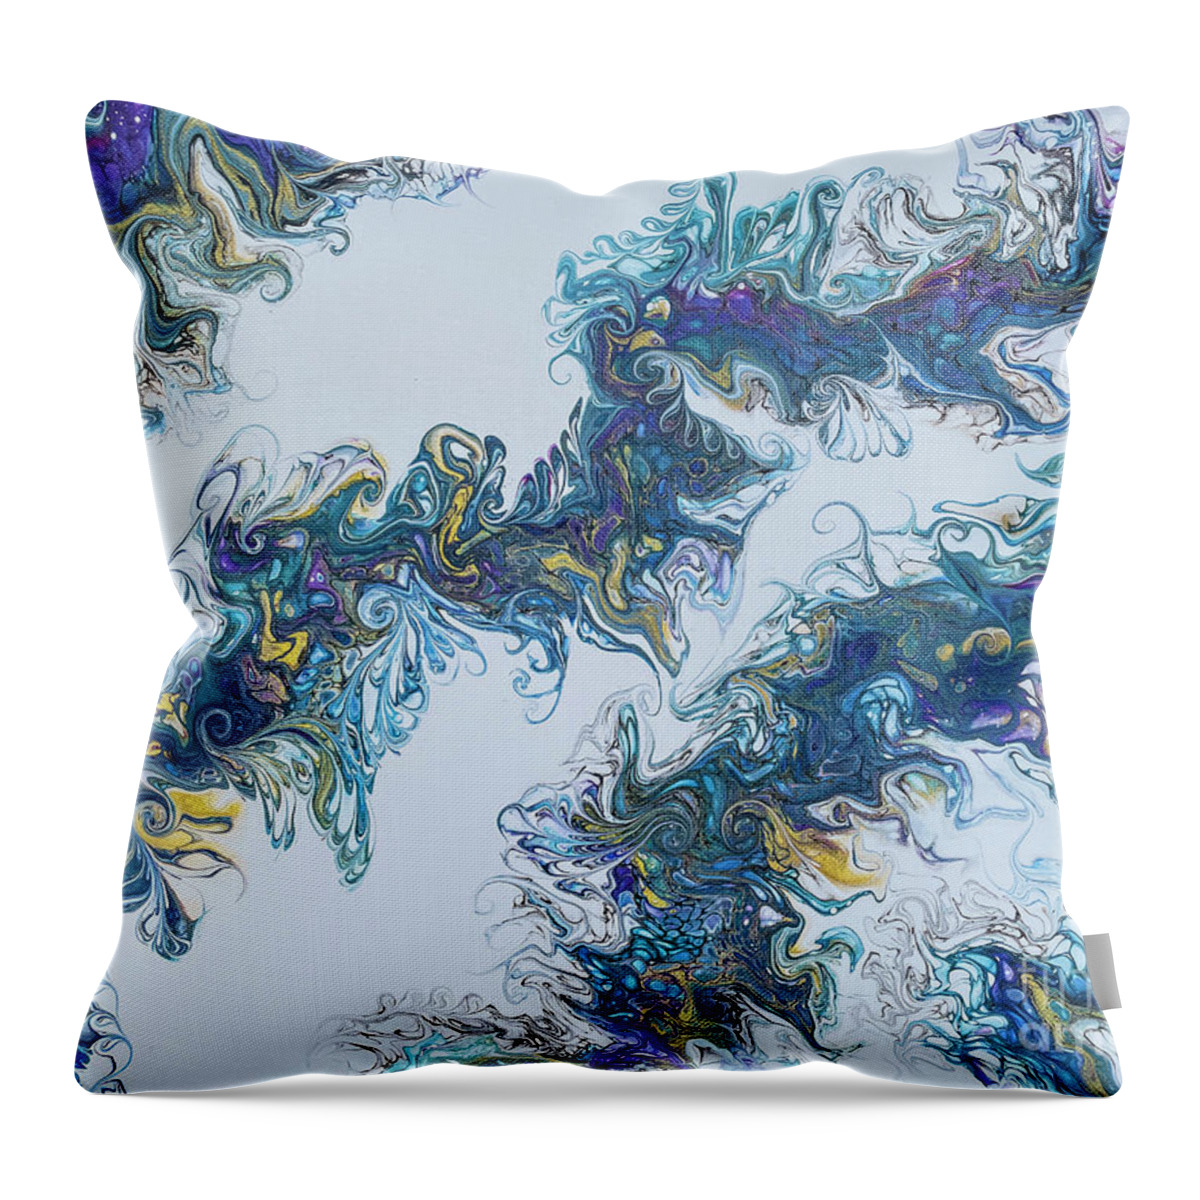 Peacock Throw Pillow featuring the painting Peacock Dragon Tales by Lucy Arnold